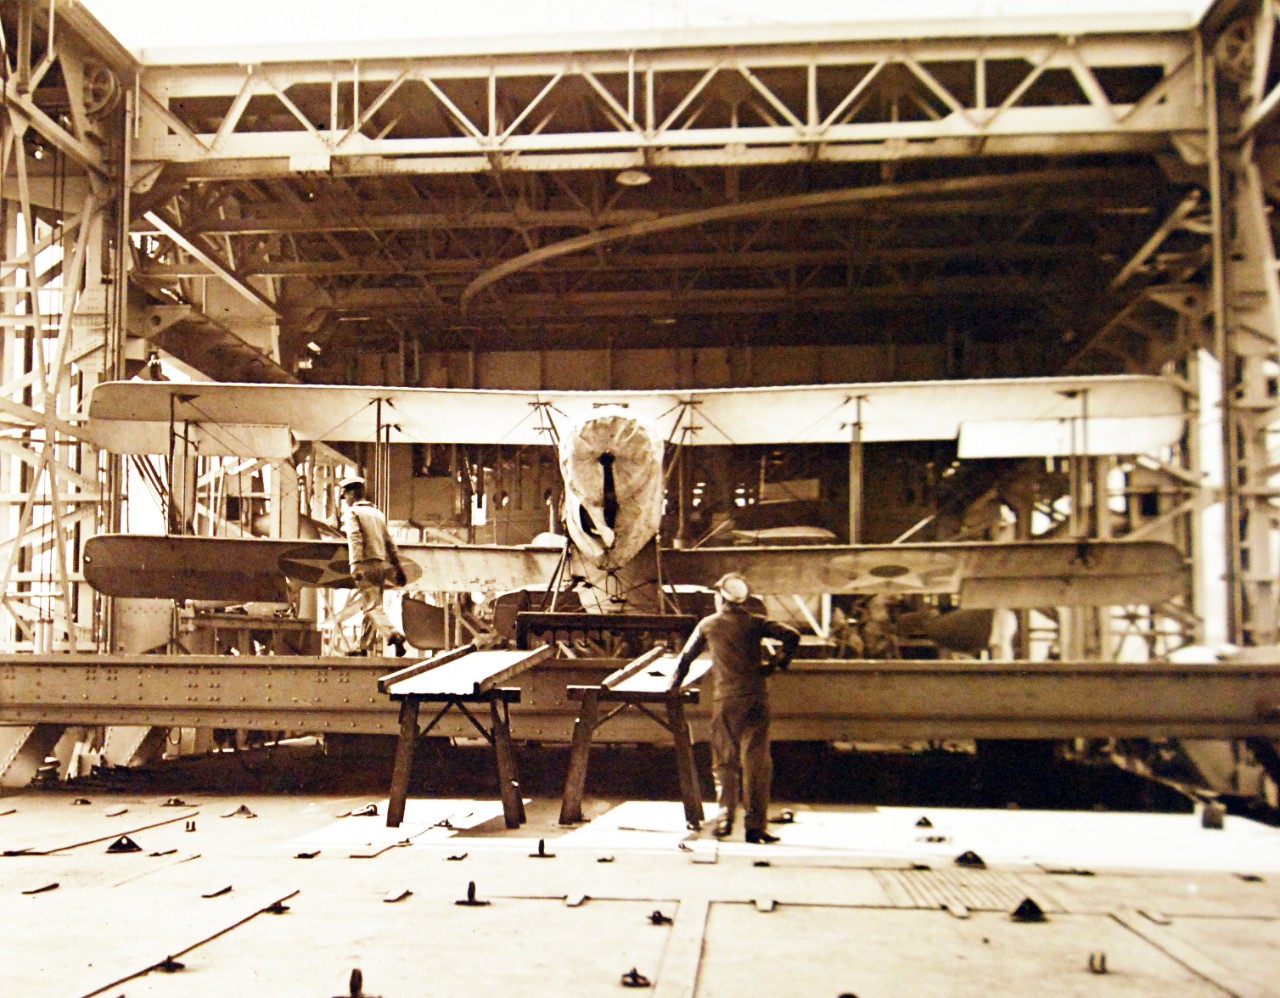 19-NS-L6:  USS Langley (CV 1),  1923.  Runways are shown in place with Vought AS-1 or VE-7, July 10, 1923.    Caption expansion, “Putting a small plane on the elevator, crew lands plane on after end of portable skids, then plane is pushed up incline on elevator by hand, a most unfortunate design.”  Official U.S. Navy photograph, now in the collections of the National Archives.   (2014/07/2) 